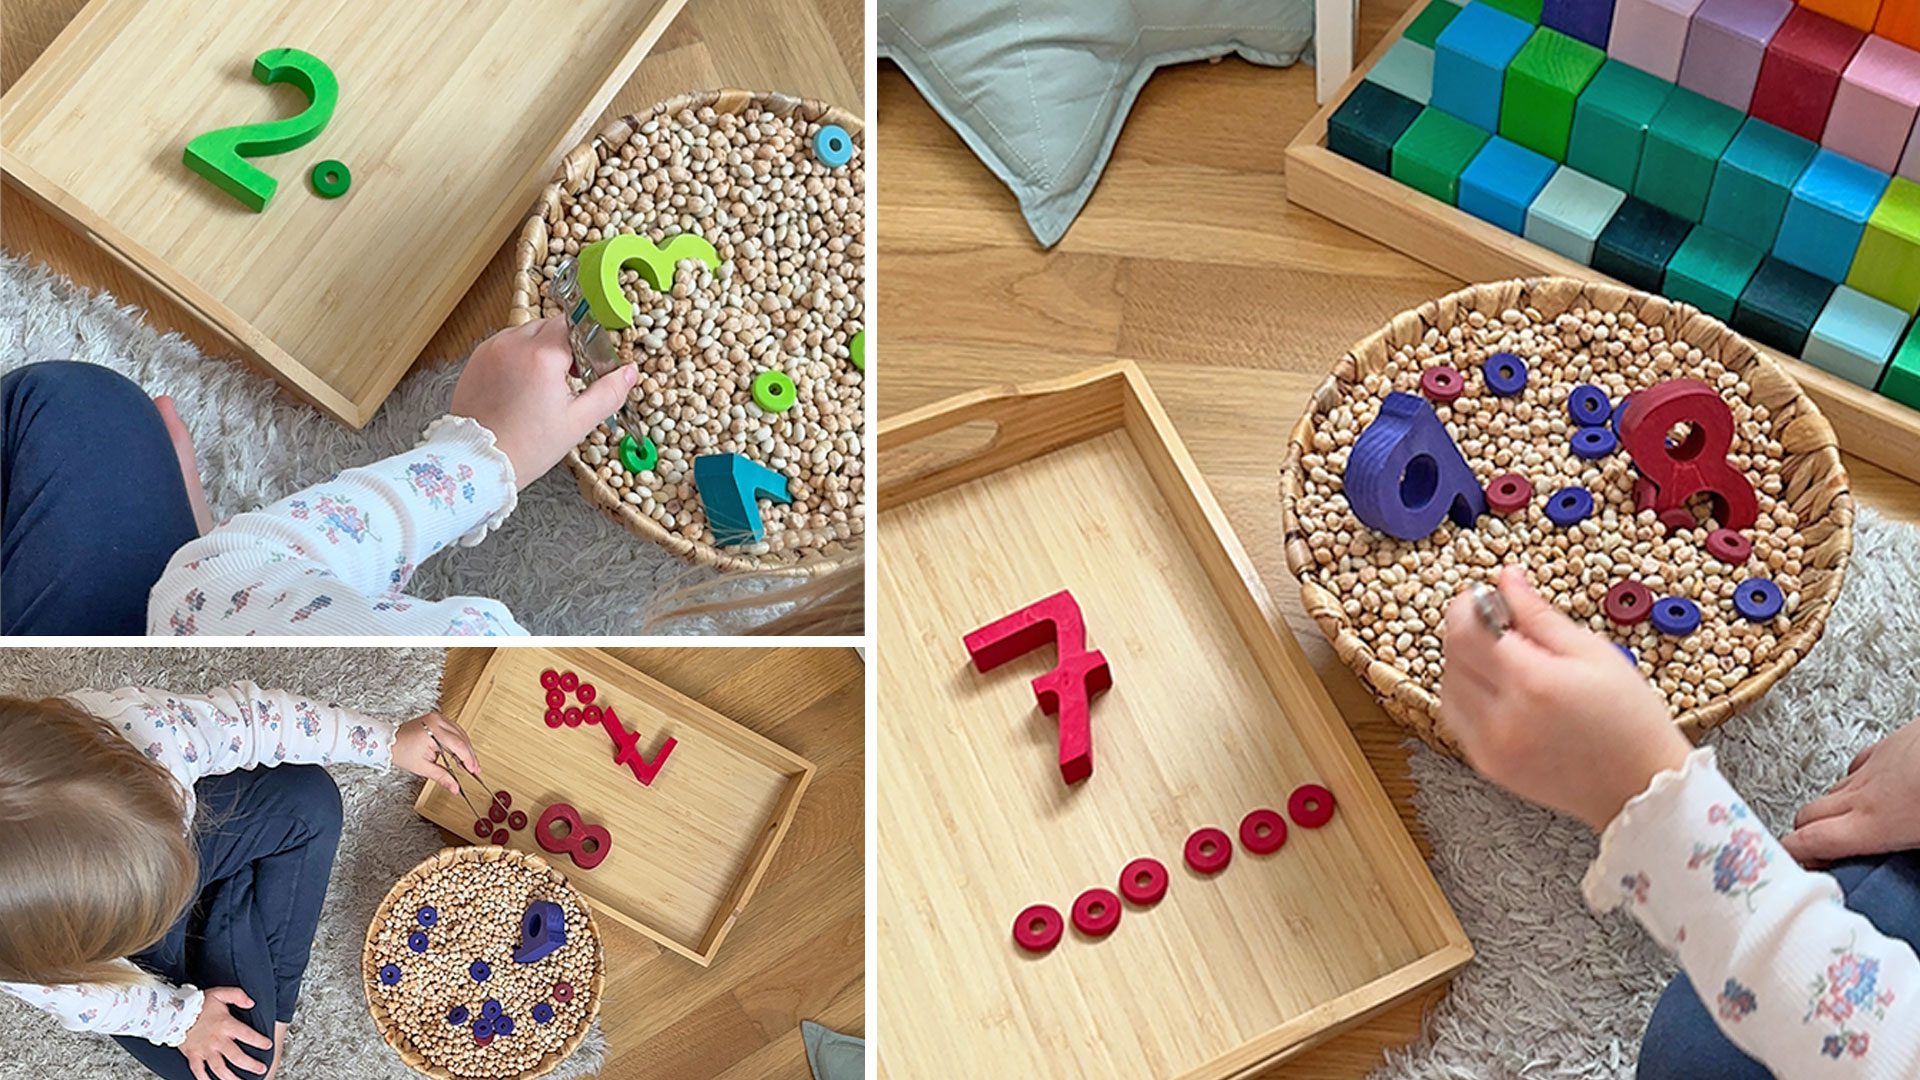 Collage of girl playing with tweezers, wooden numbers and loose small parts.